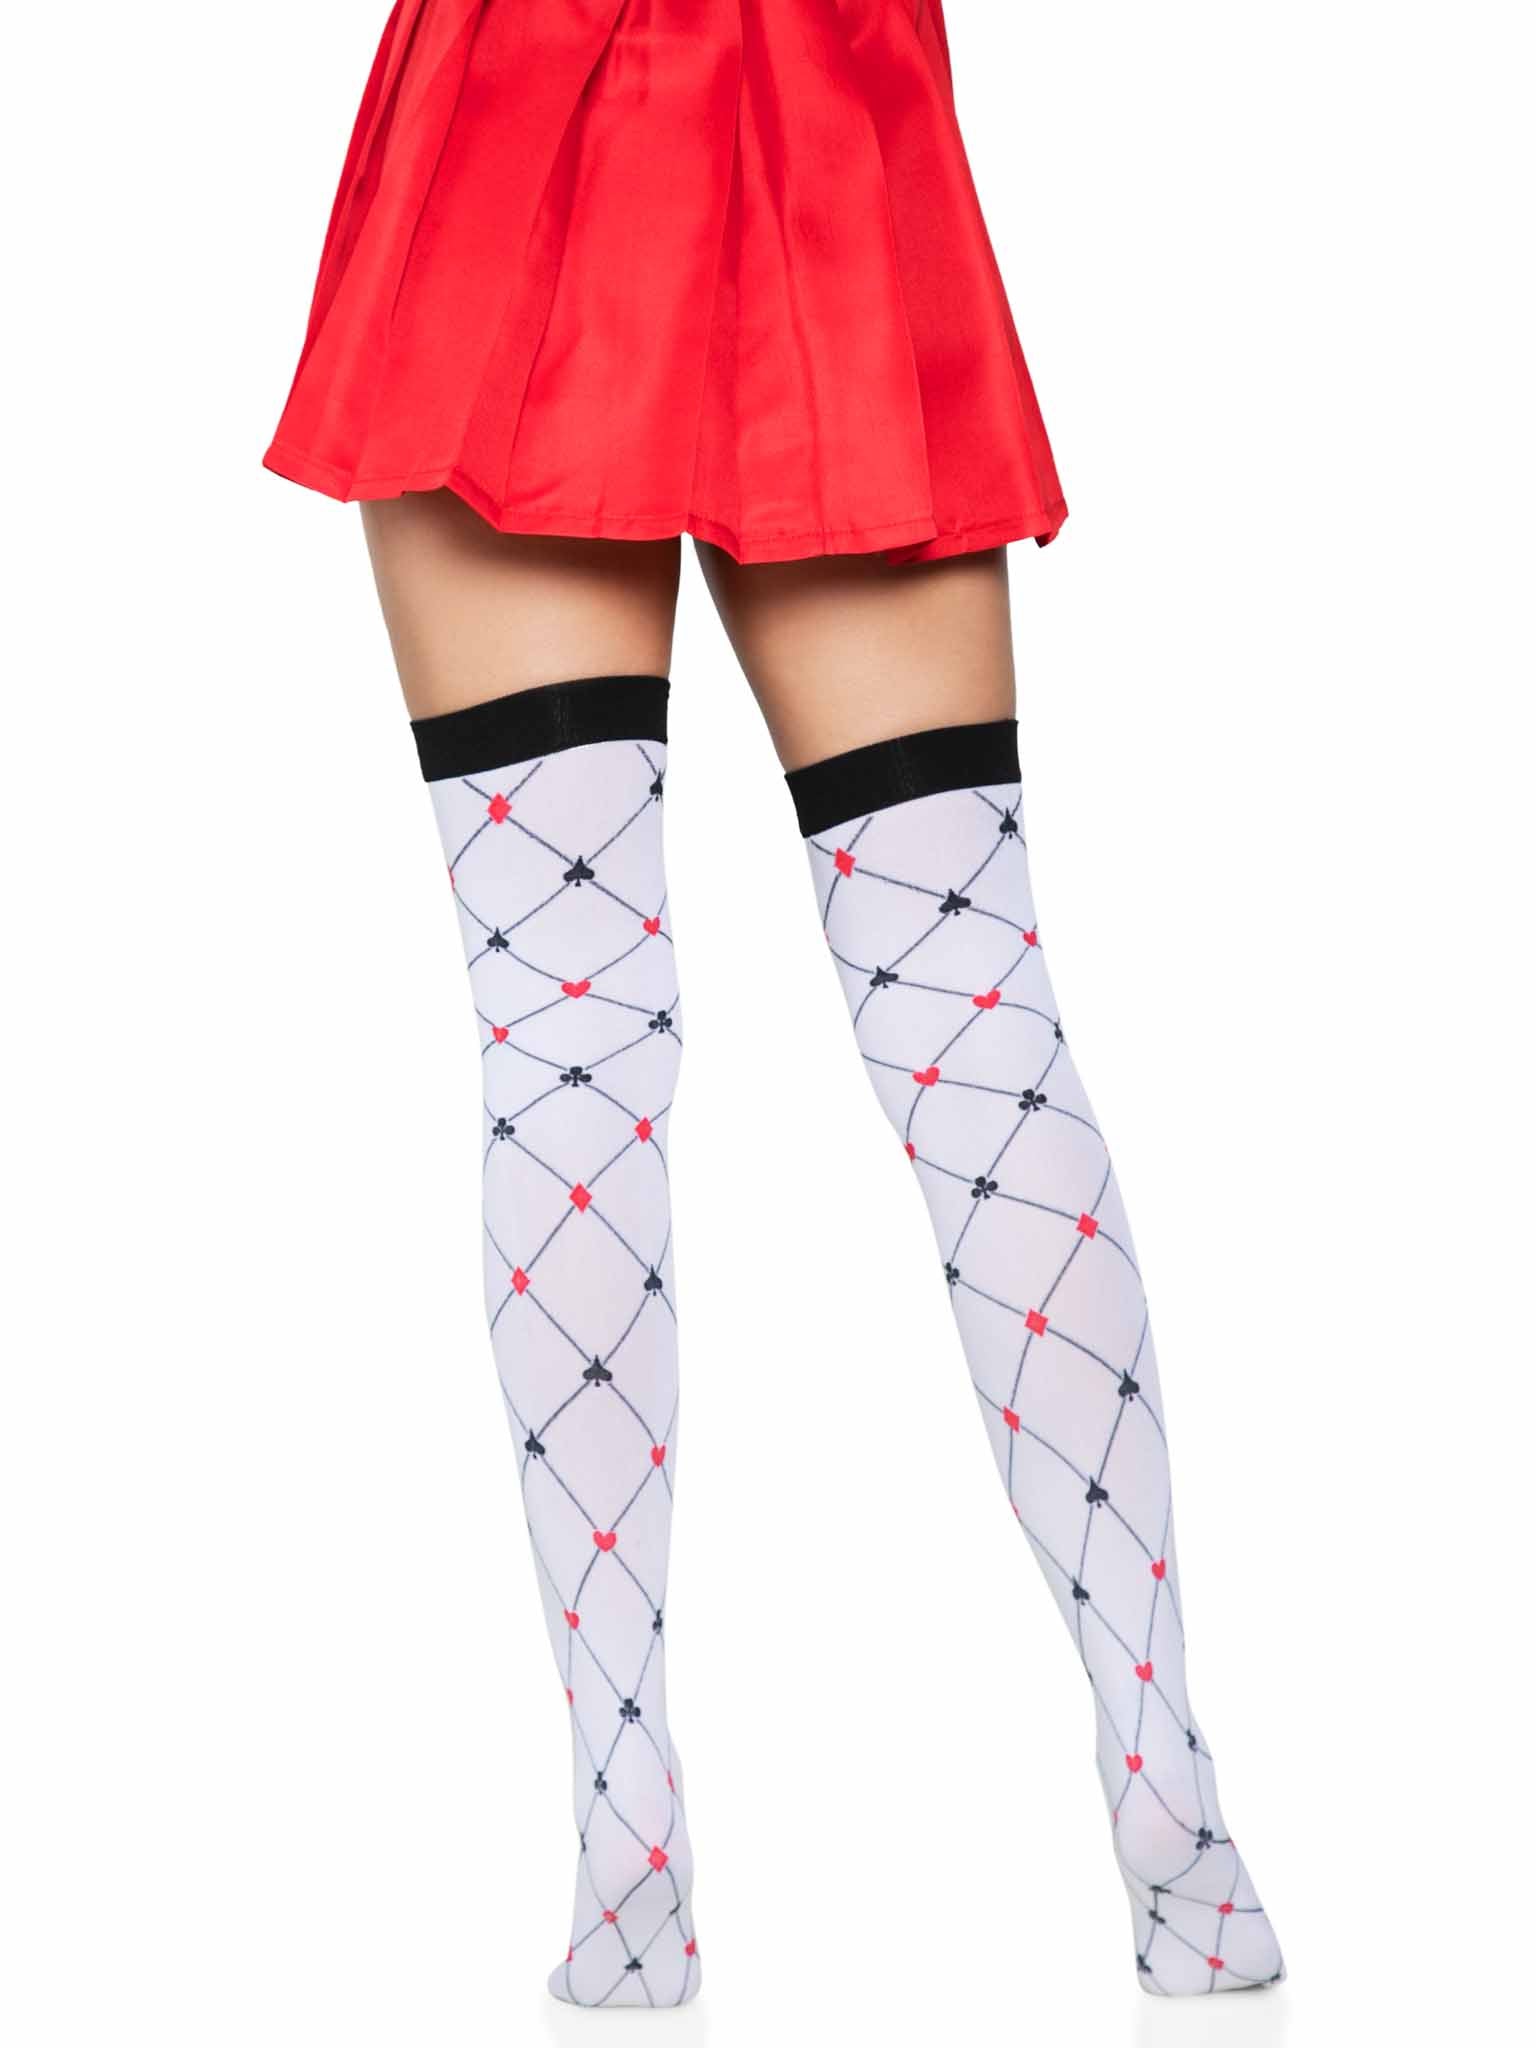 Card Suit Thigh High Stockings